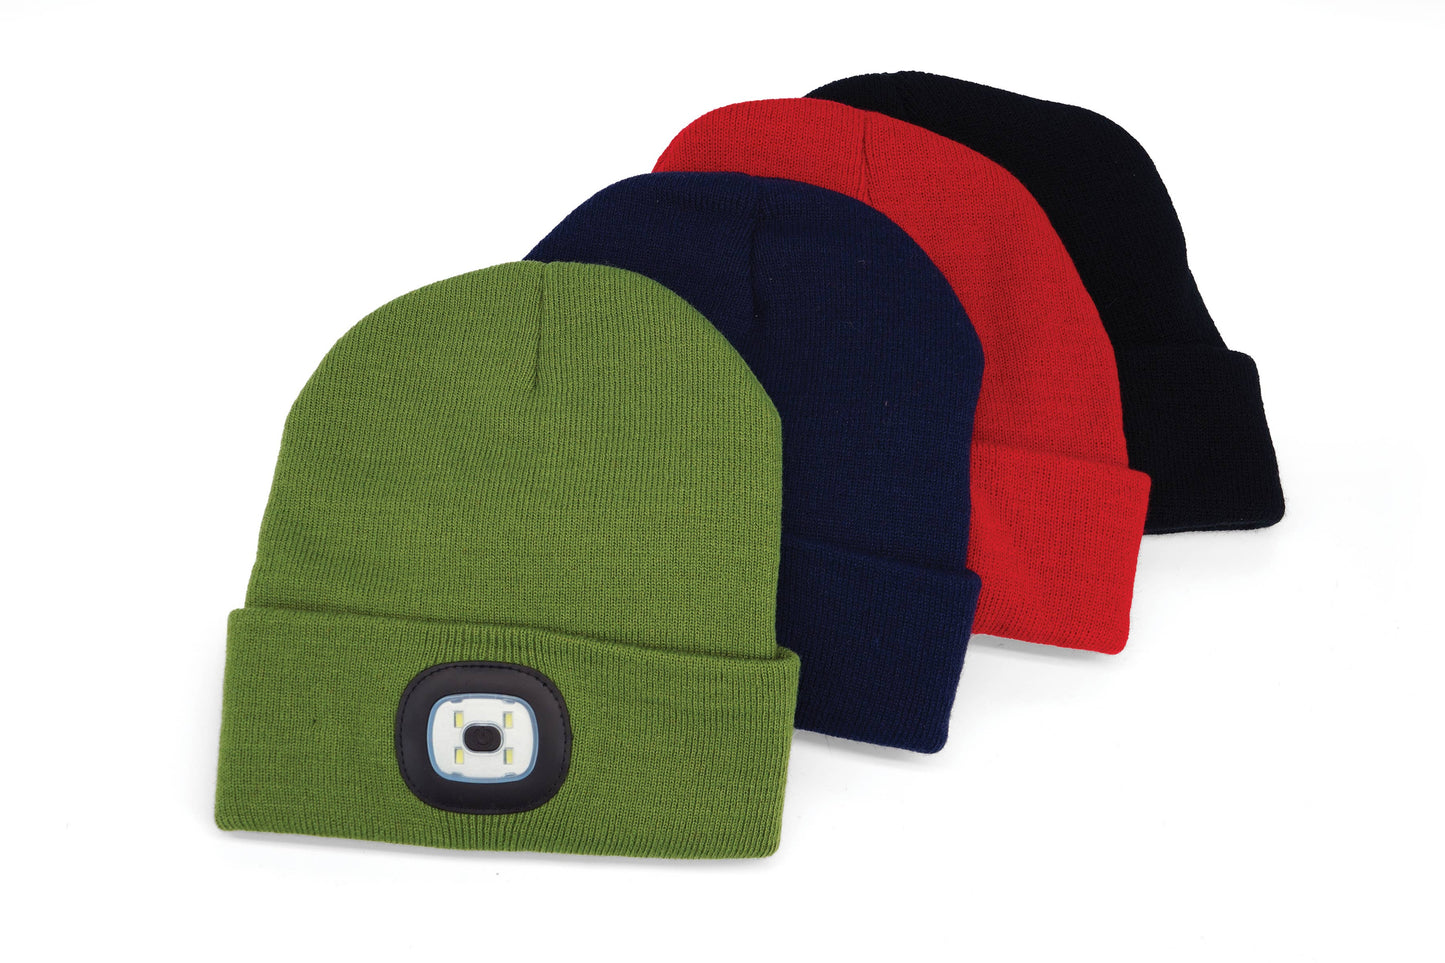 Night Scope Rechargeable LED Beanie Open Stock: Black